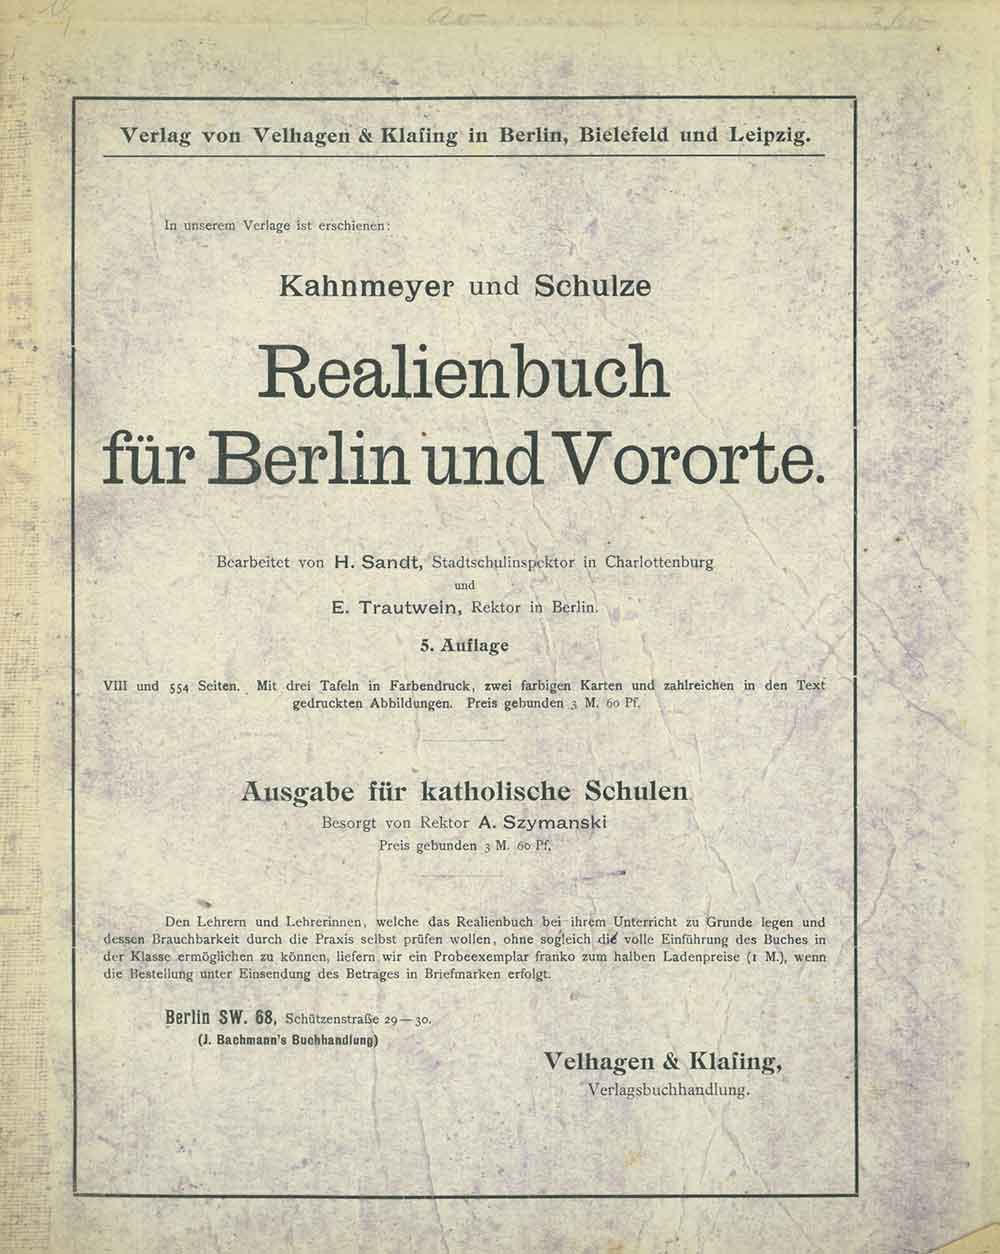 Inside front cover of Andrees 'Berliner Schul-Atlas', 1916, with advertisement for Kahnmeyer and Schulze 'Realienbuch fur Berlin und Vororte', published size to print borders 17.13 cm wide by 24.04 cm high.